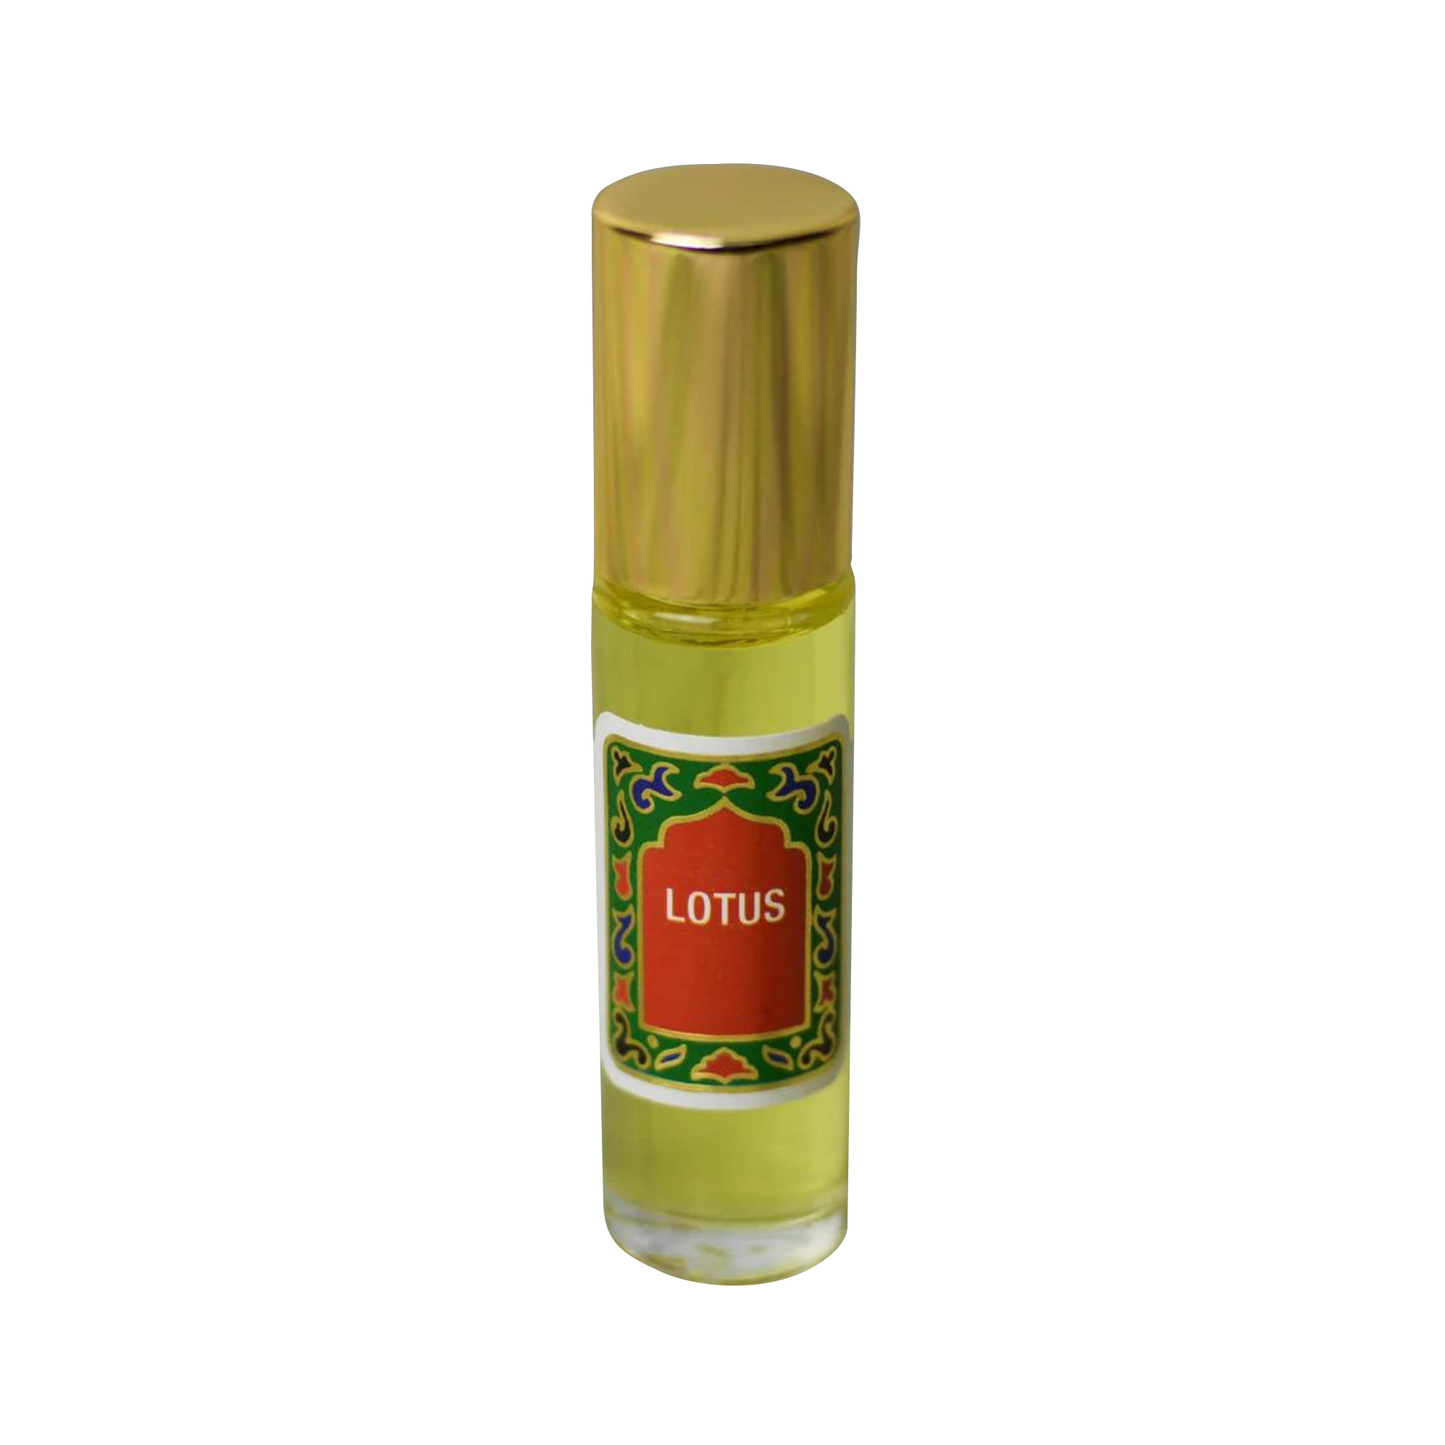 Primary image of Lotus Fragrance Roll-On